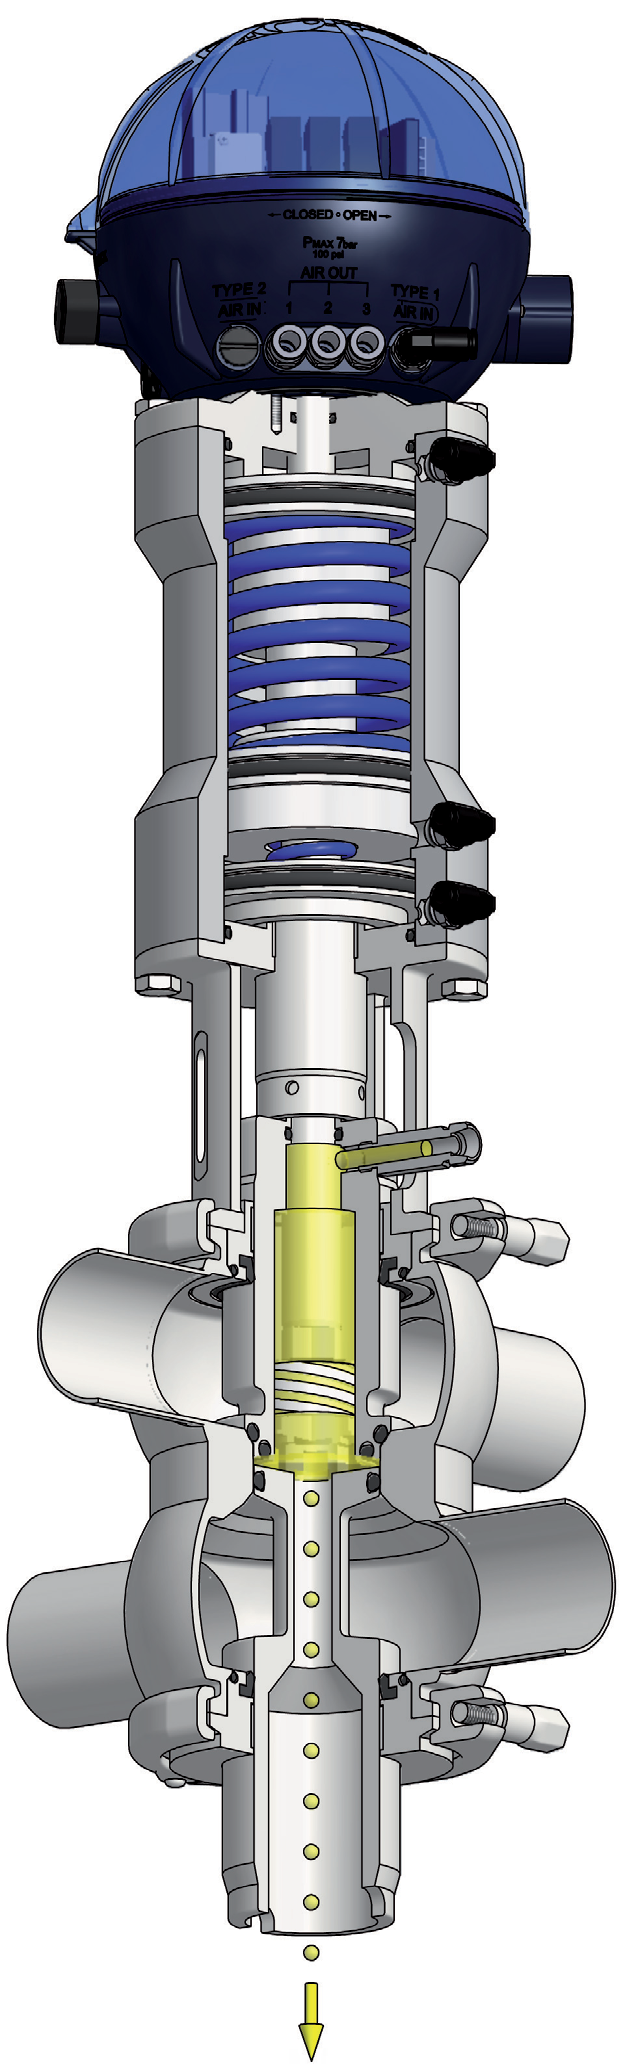 In automated double seat valves, especially where separate seat lifts are not available, an auxiliary external cleaning system will enable CIP fluids to clean the telescopic